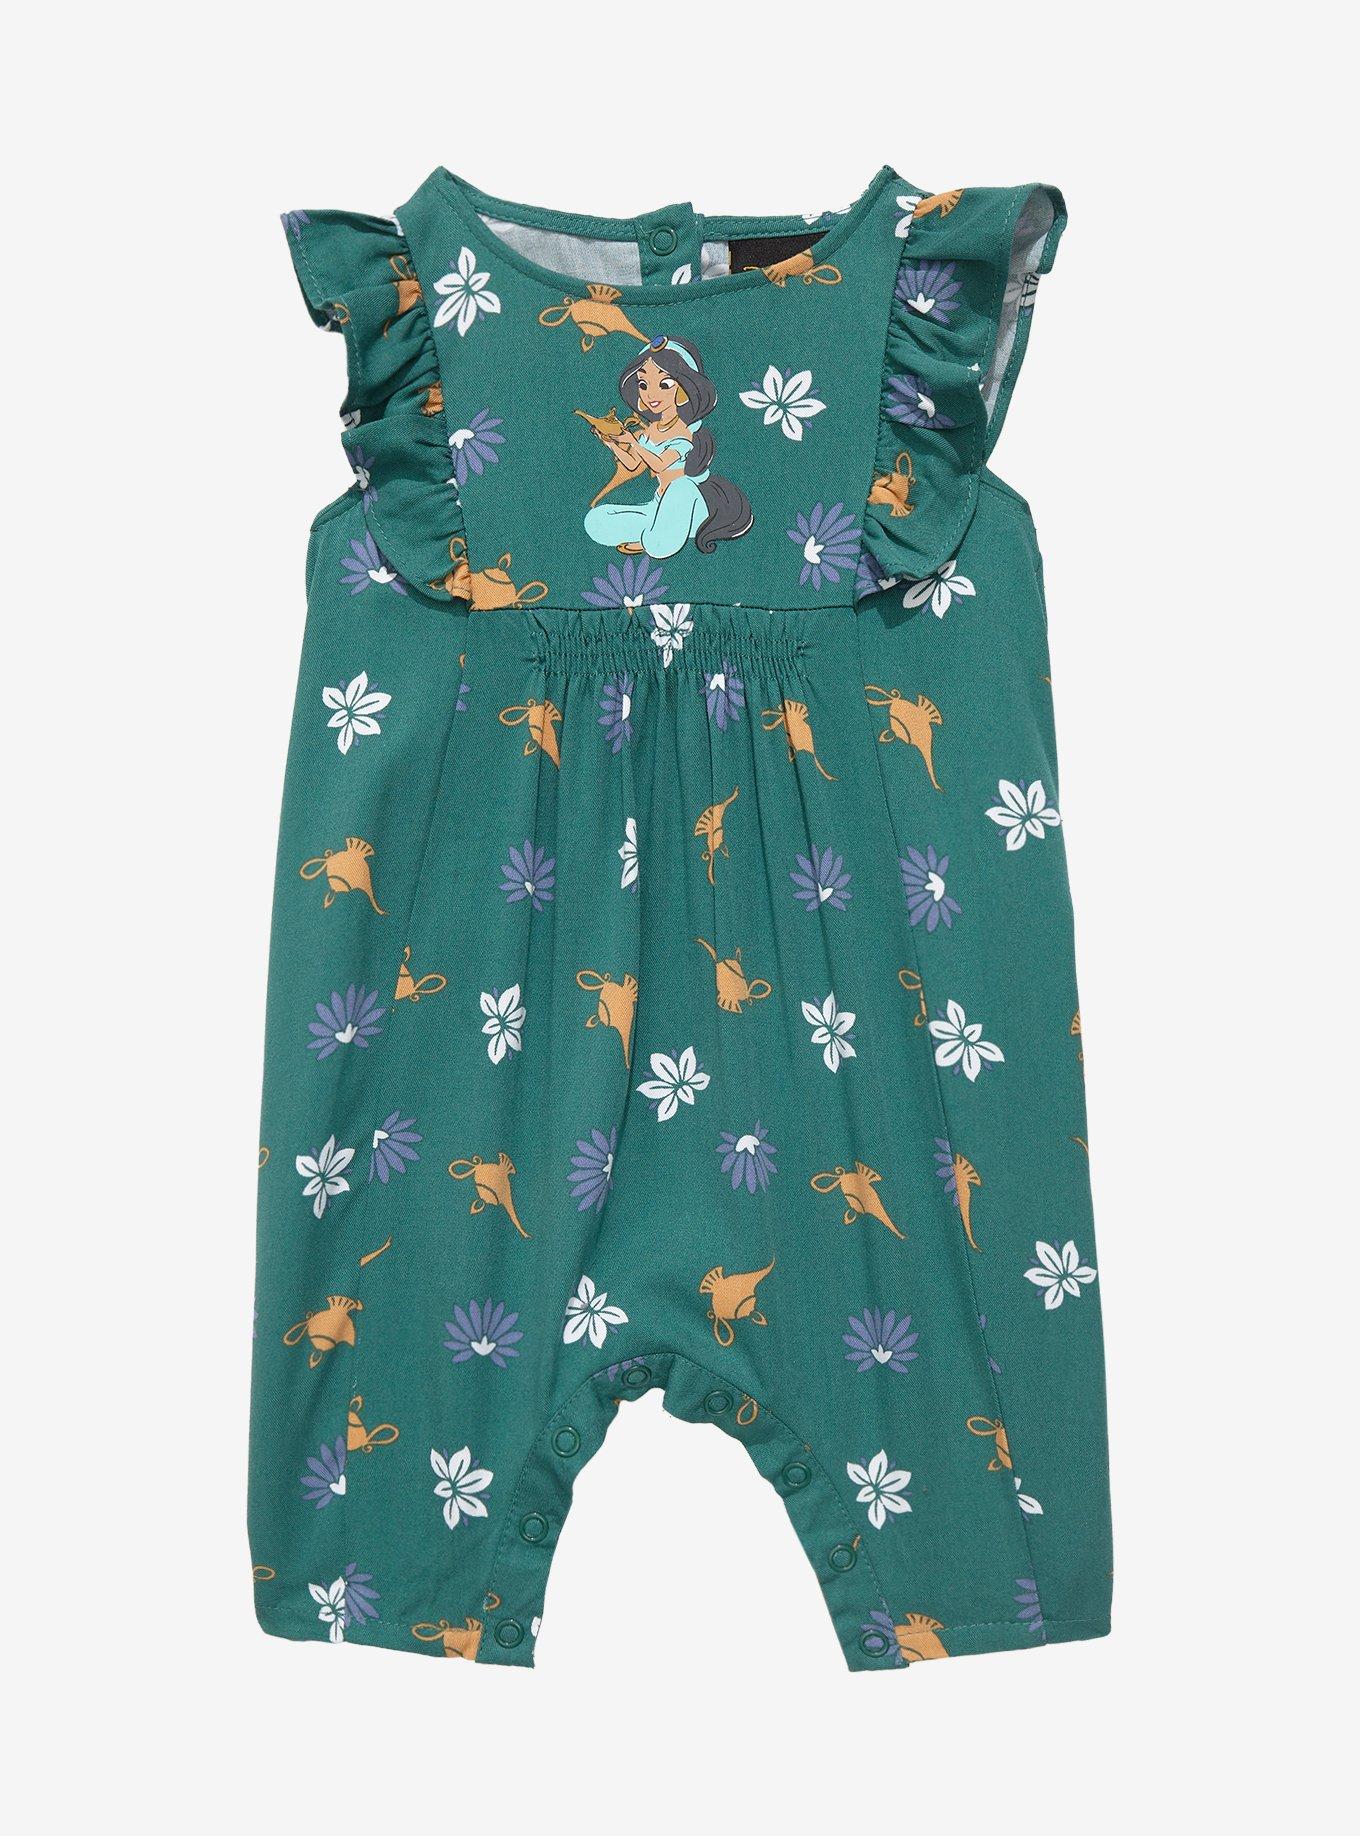 Our Universe Disney Aladdin Princess Jasmine Ruffled Infant One-Piece - BoxLunch Exclusive , SAGE, hi-res